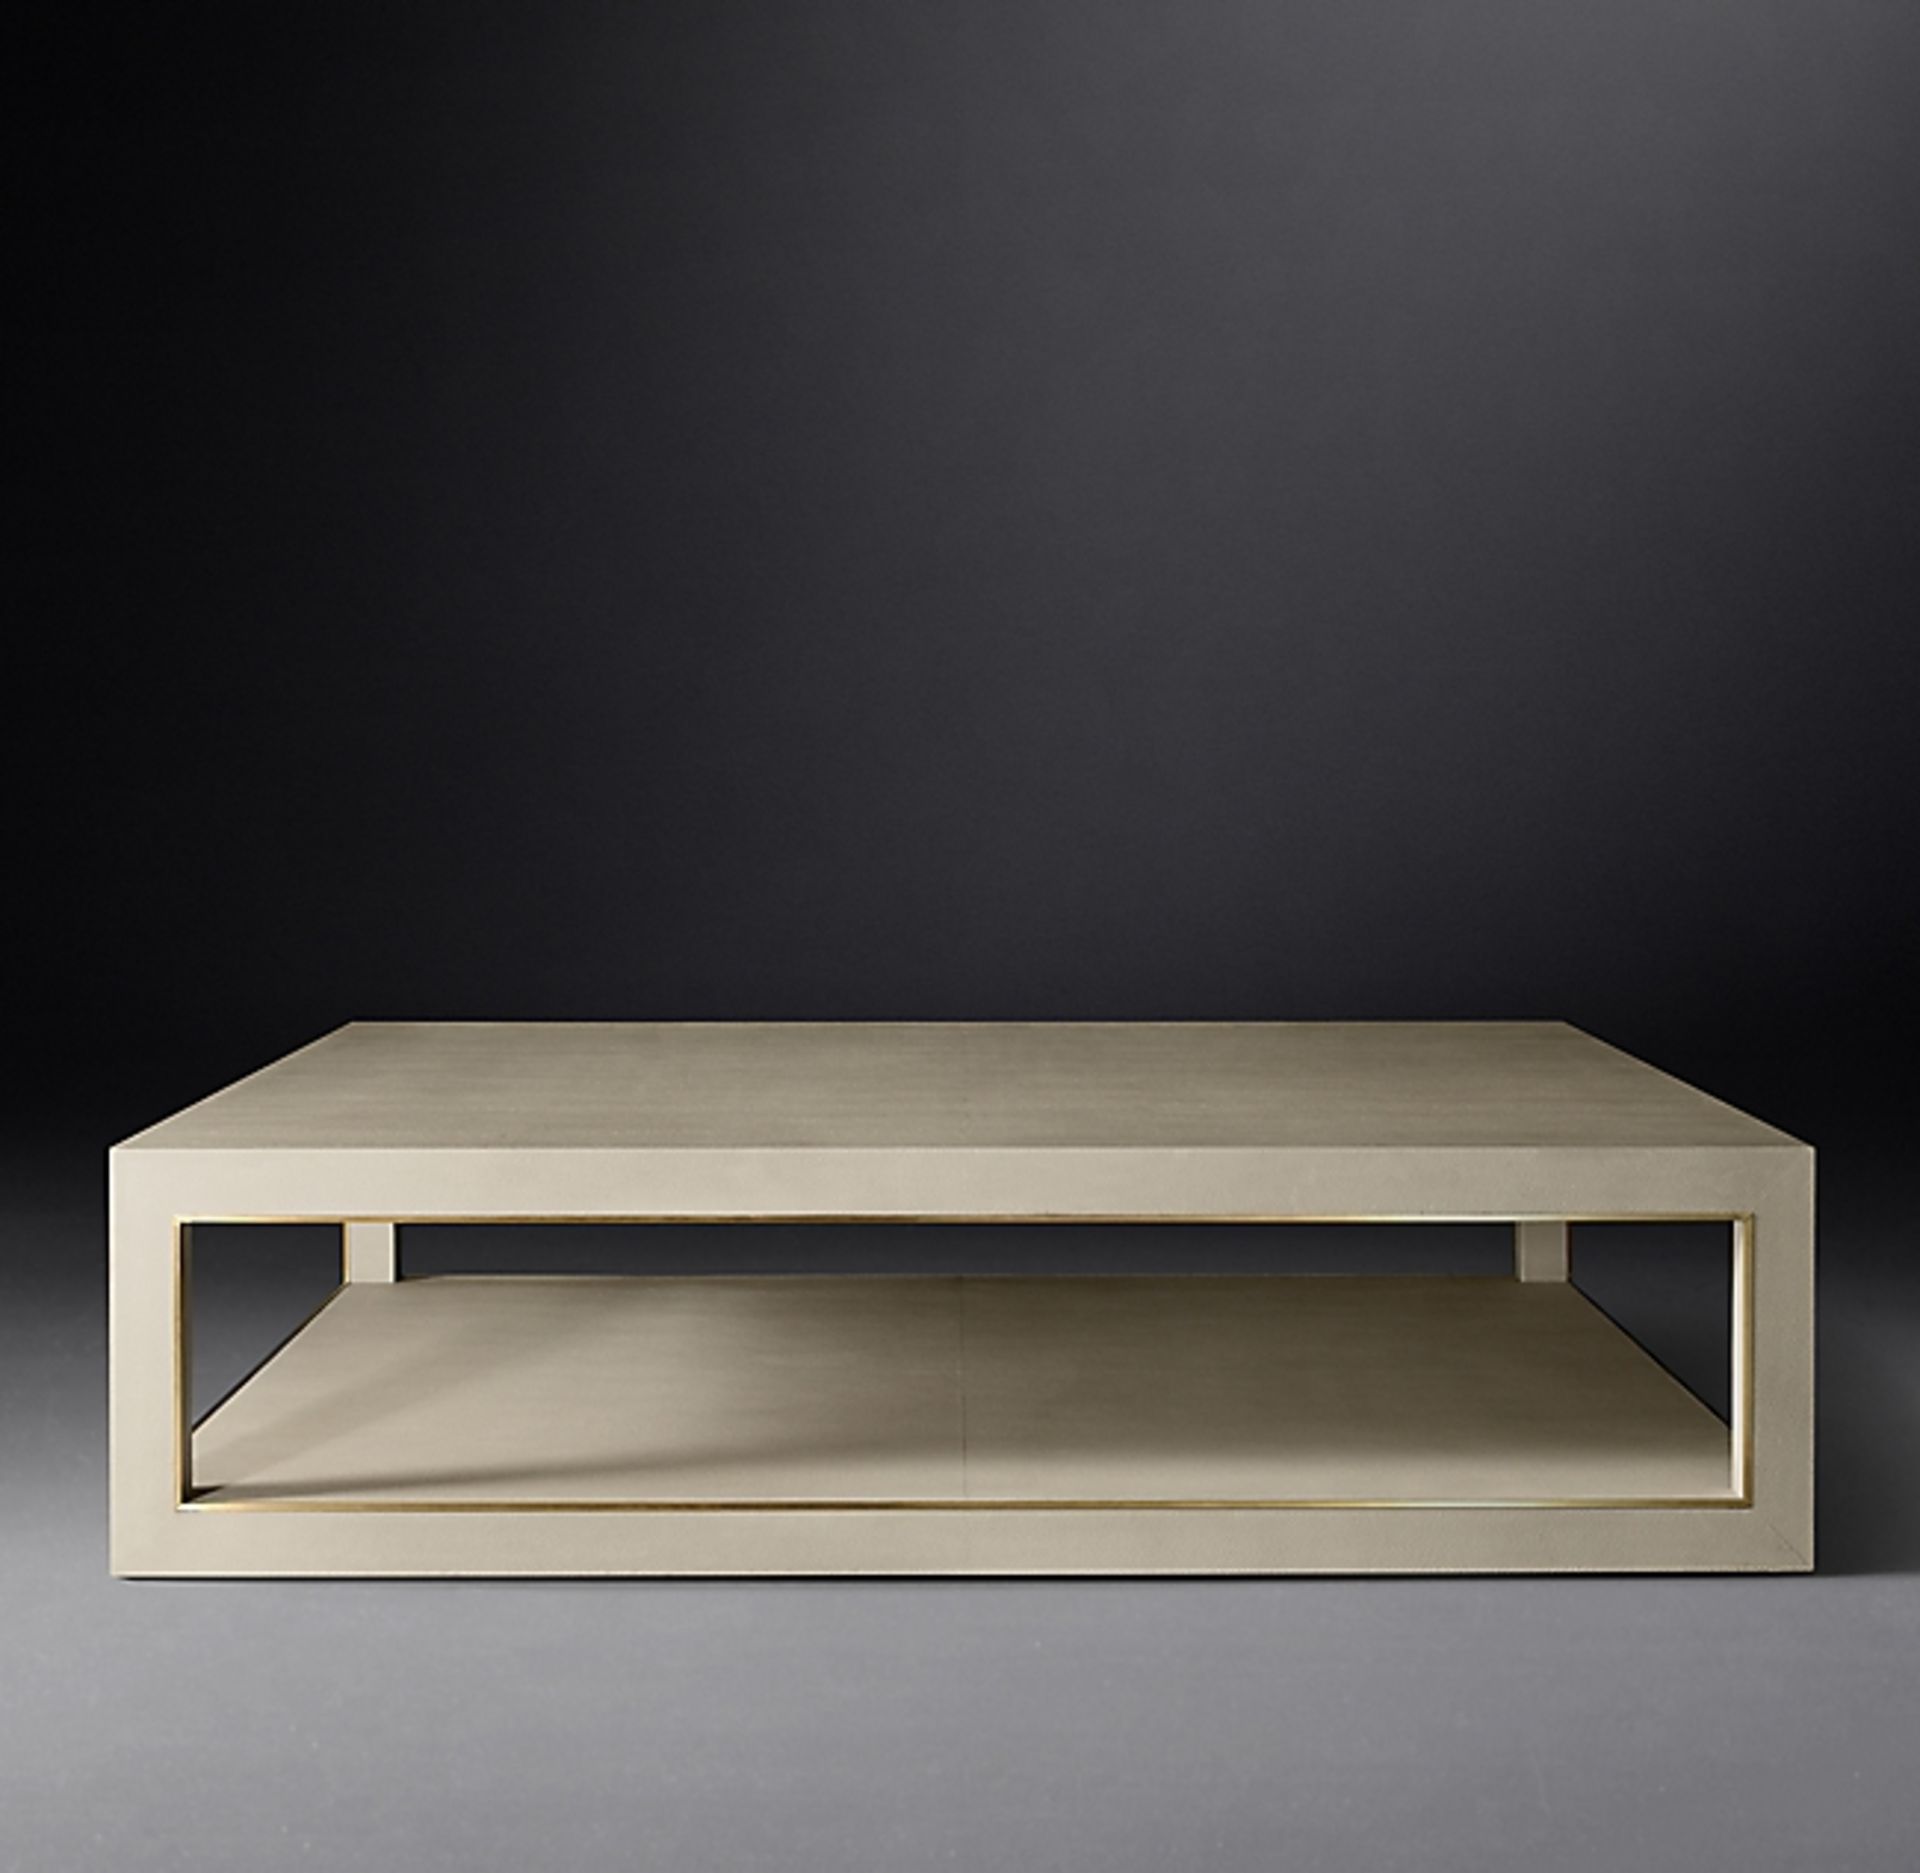 Cela White Shagreen Square Coffee Table Crafted of shagreen-embossed leather with the texture,